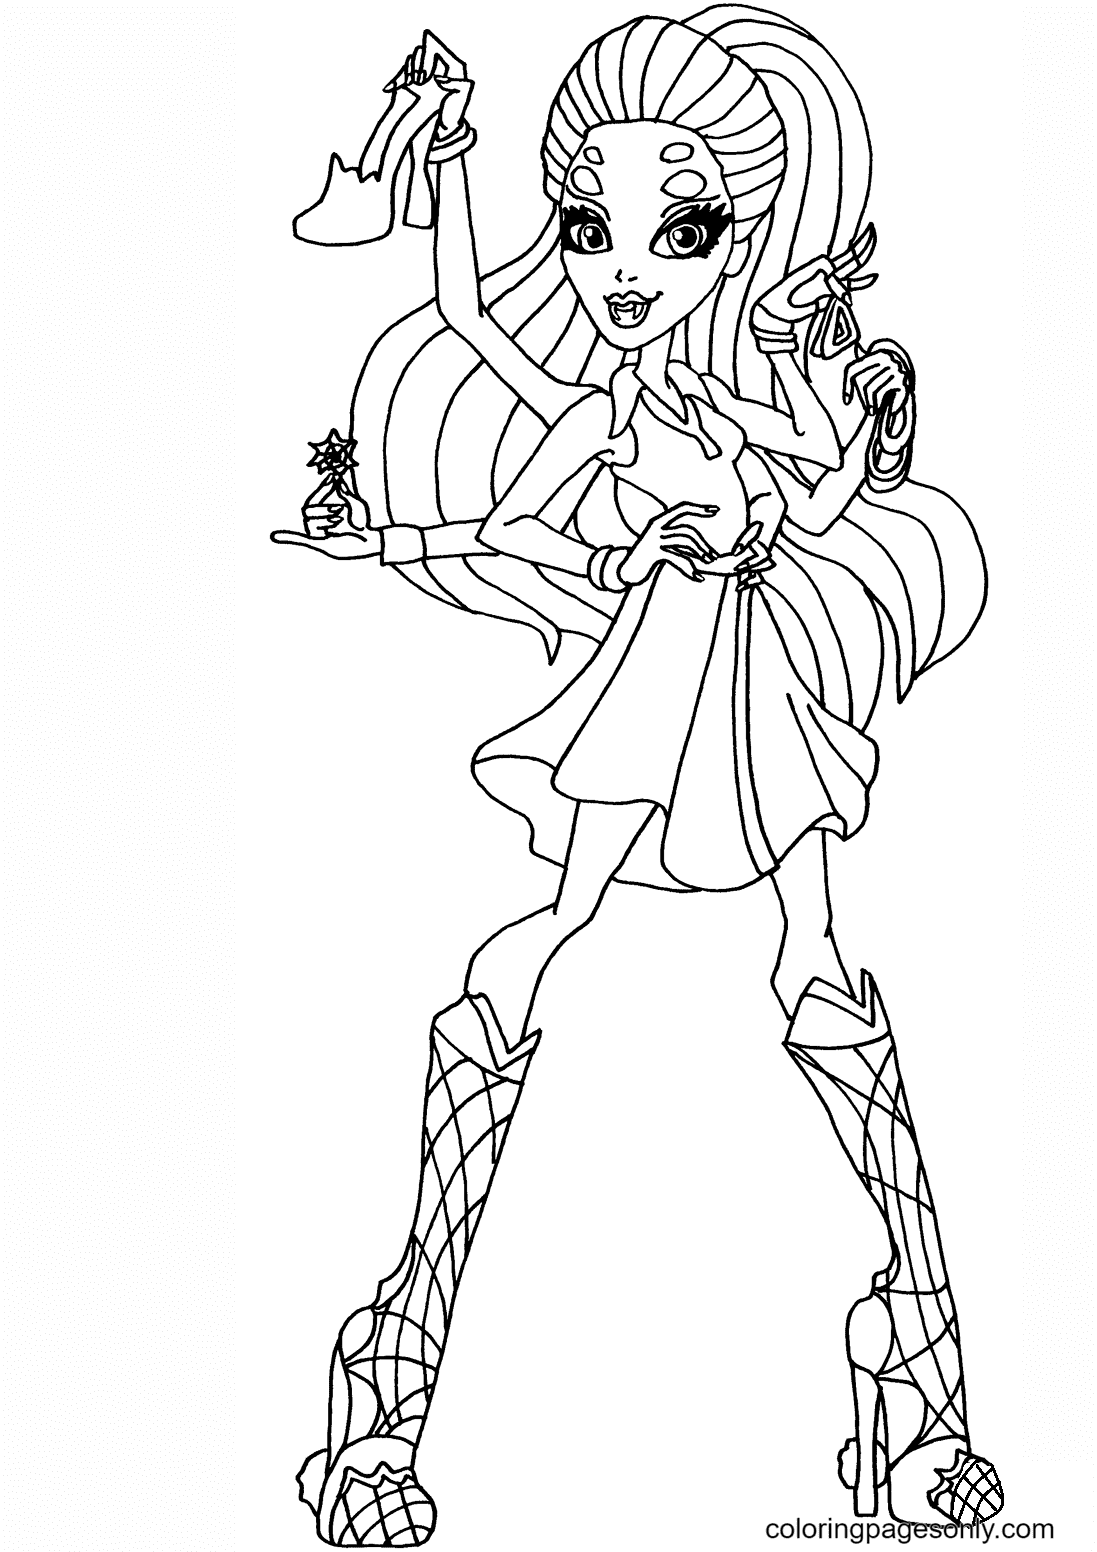 Wydowna Spider Coloring Page